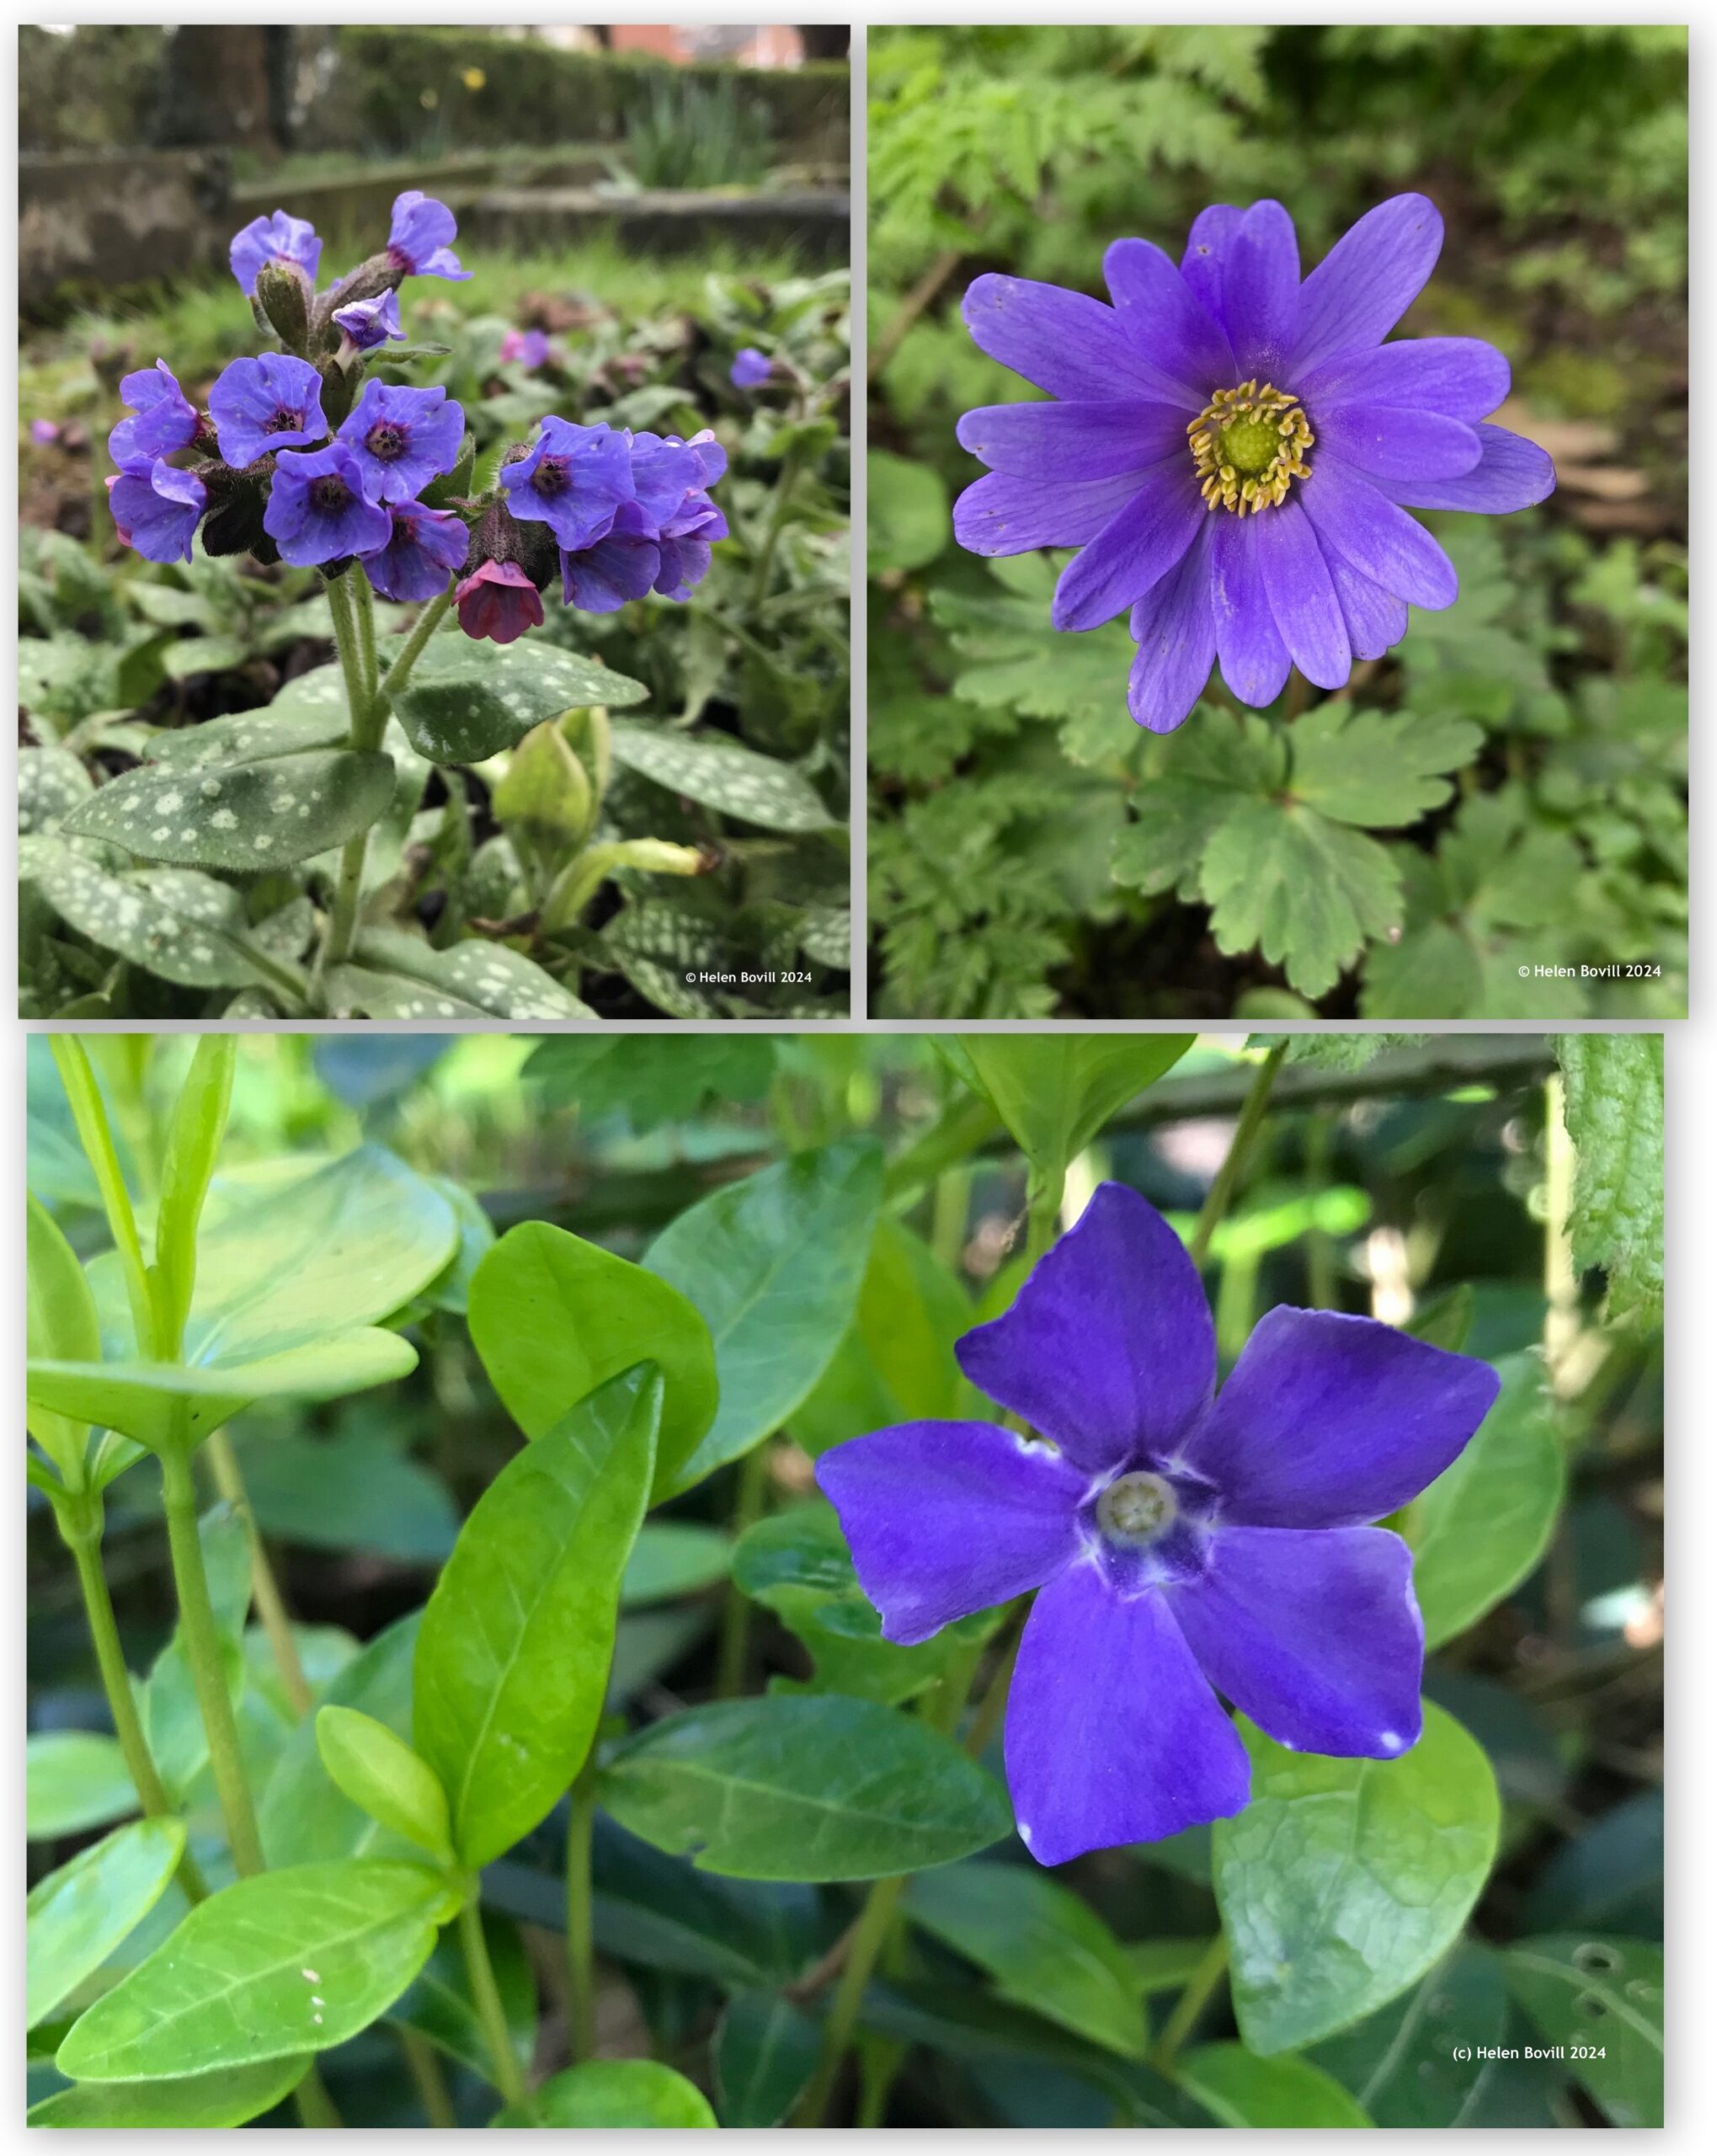 Three photos of blue flowers in the cemetery - Pulmonaria, Greek Anemone and Periwinkle